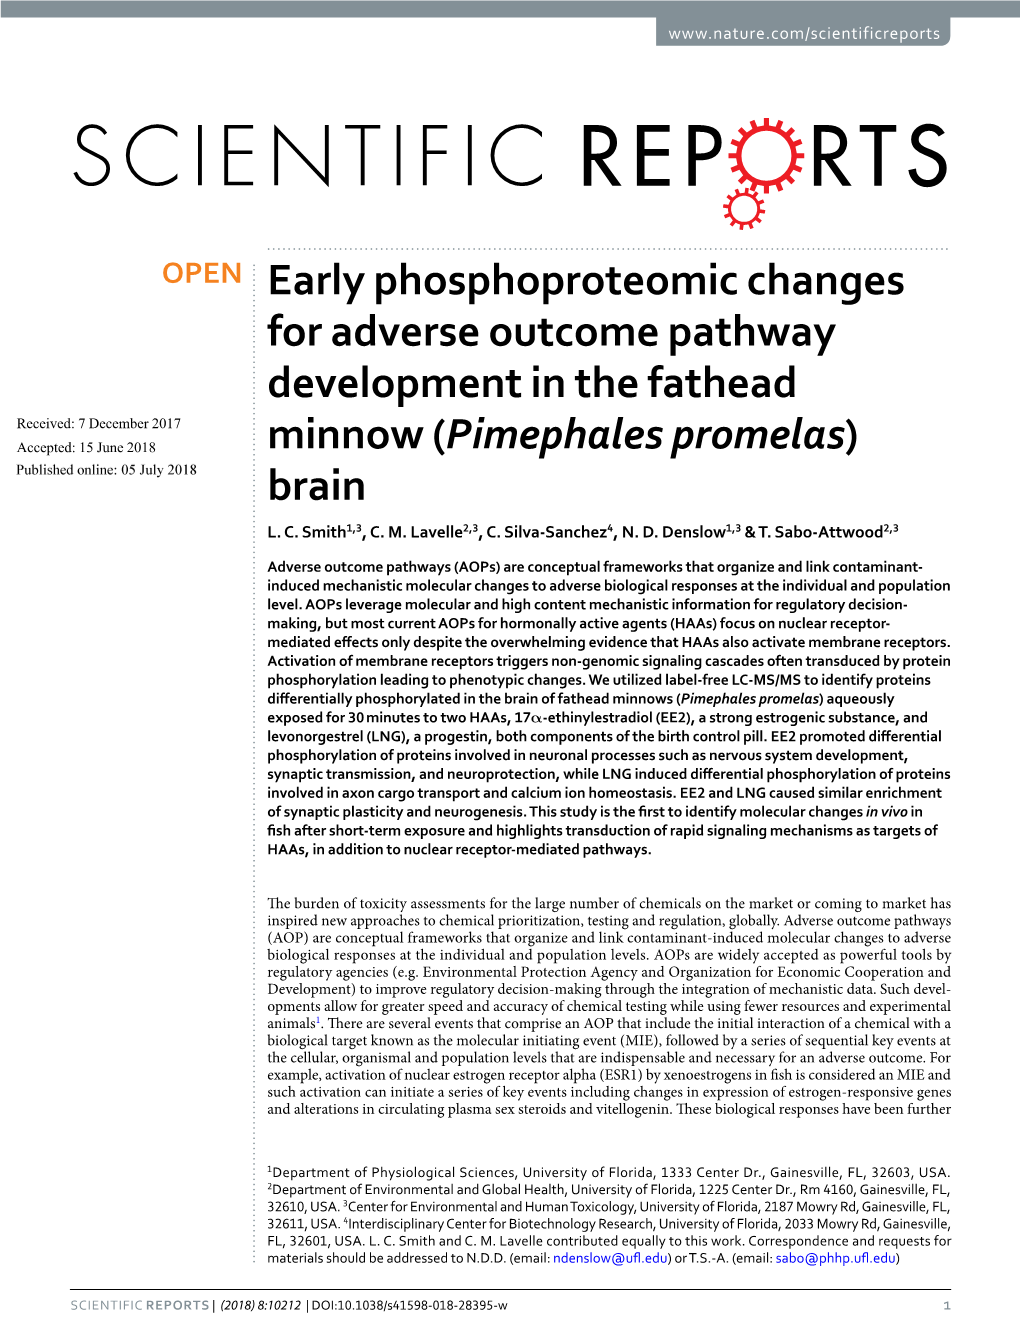 Early Phosphoproteomic Changes for Adverse Outcome Pathway